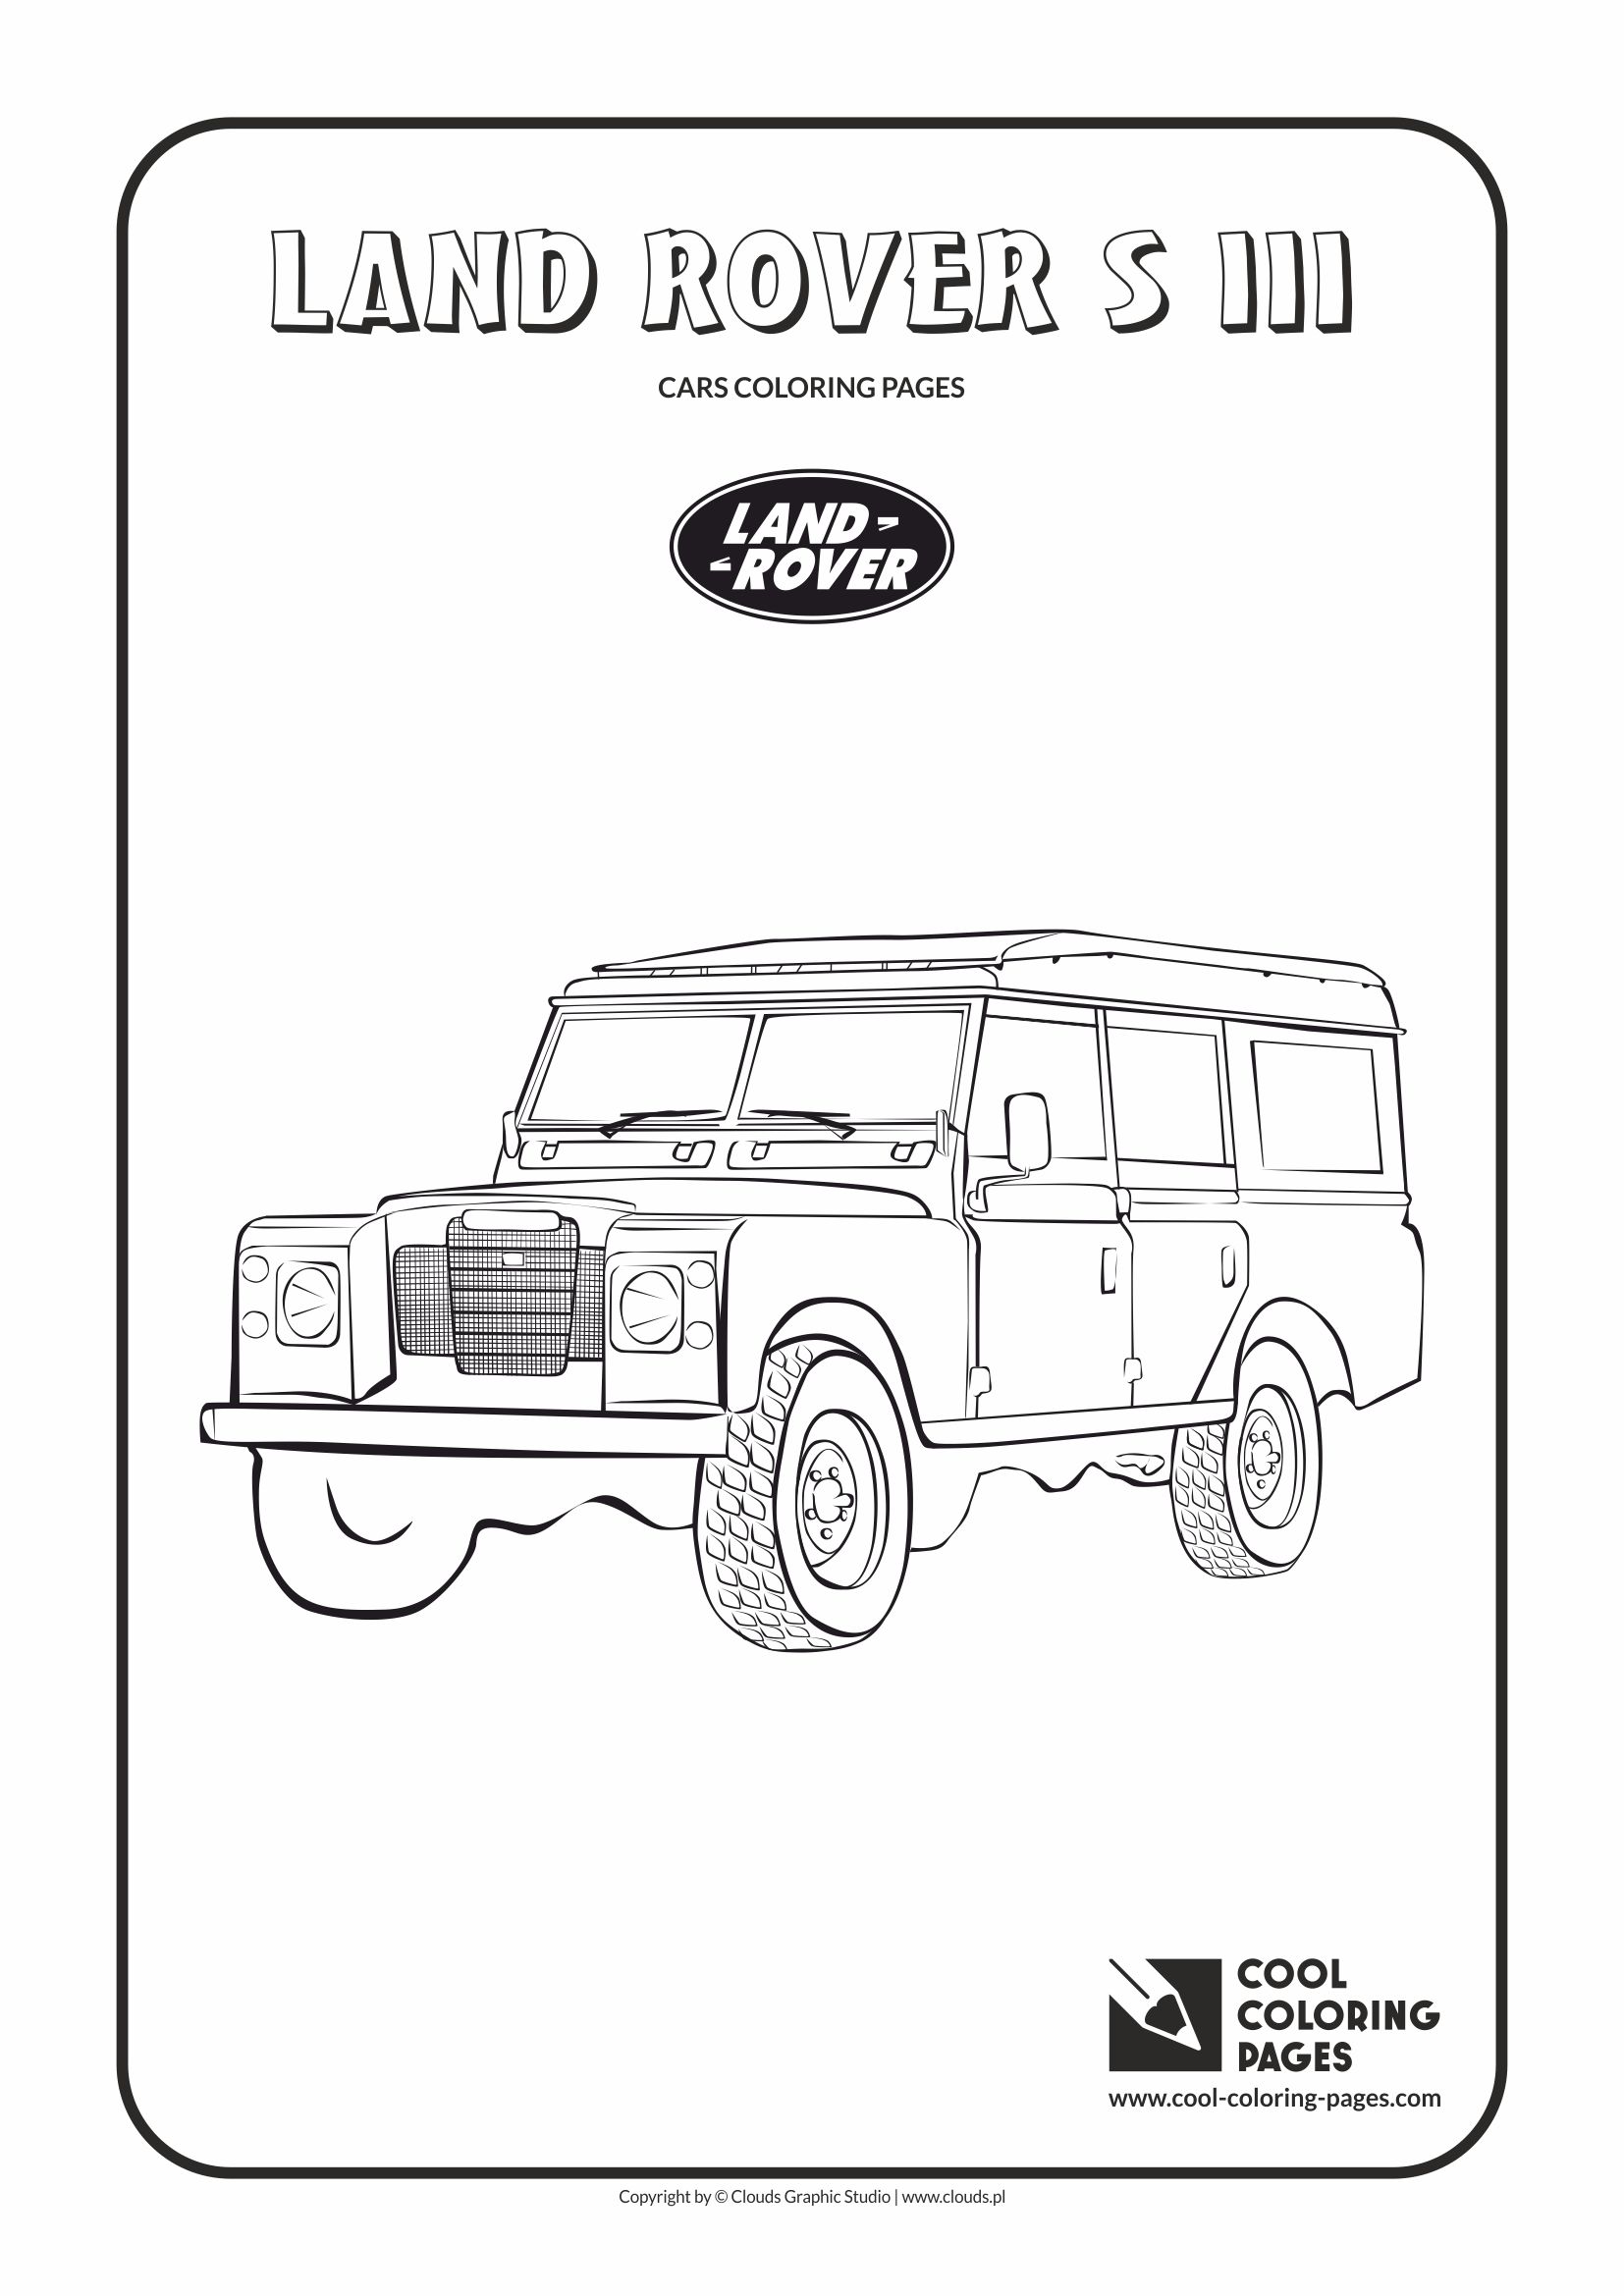 Cool Coloring Pages - Vehicles / Land Rover s III / Coloring page with Land Rover s III